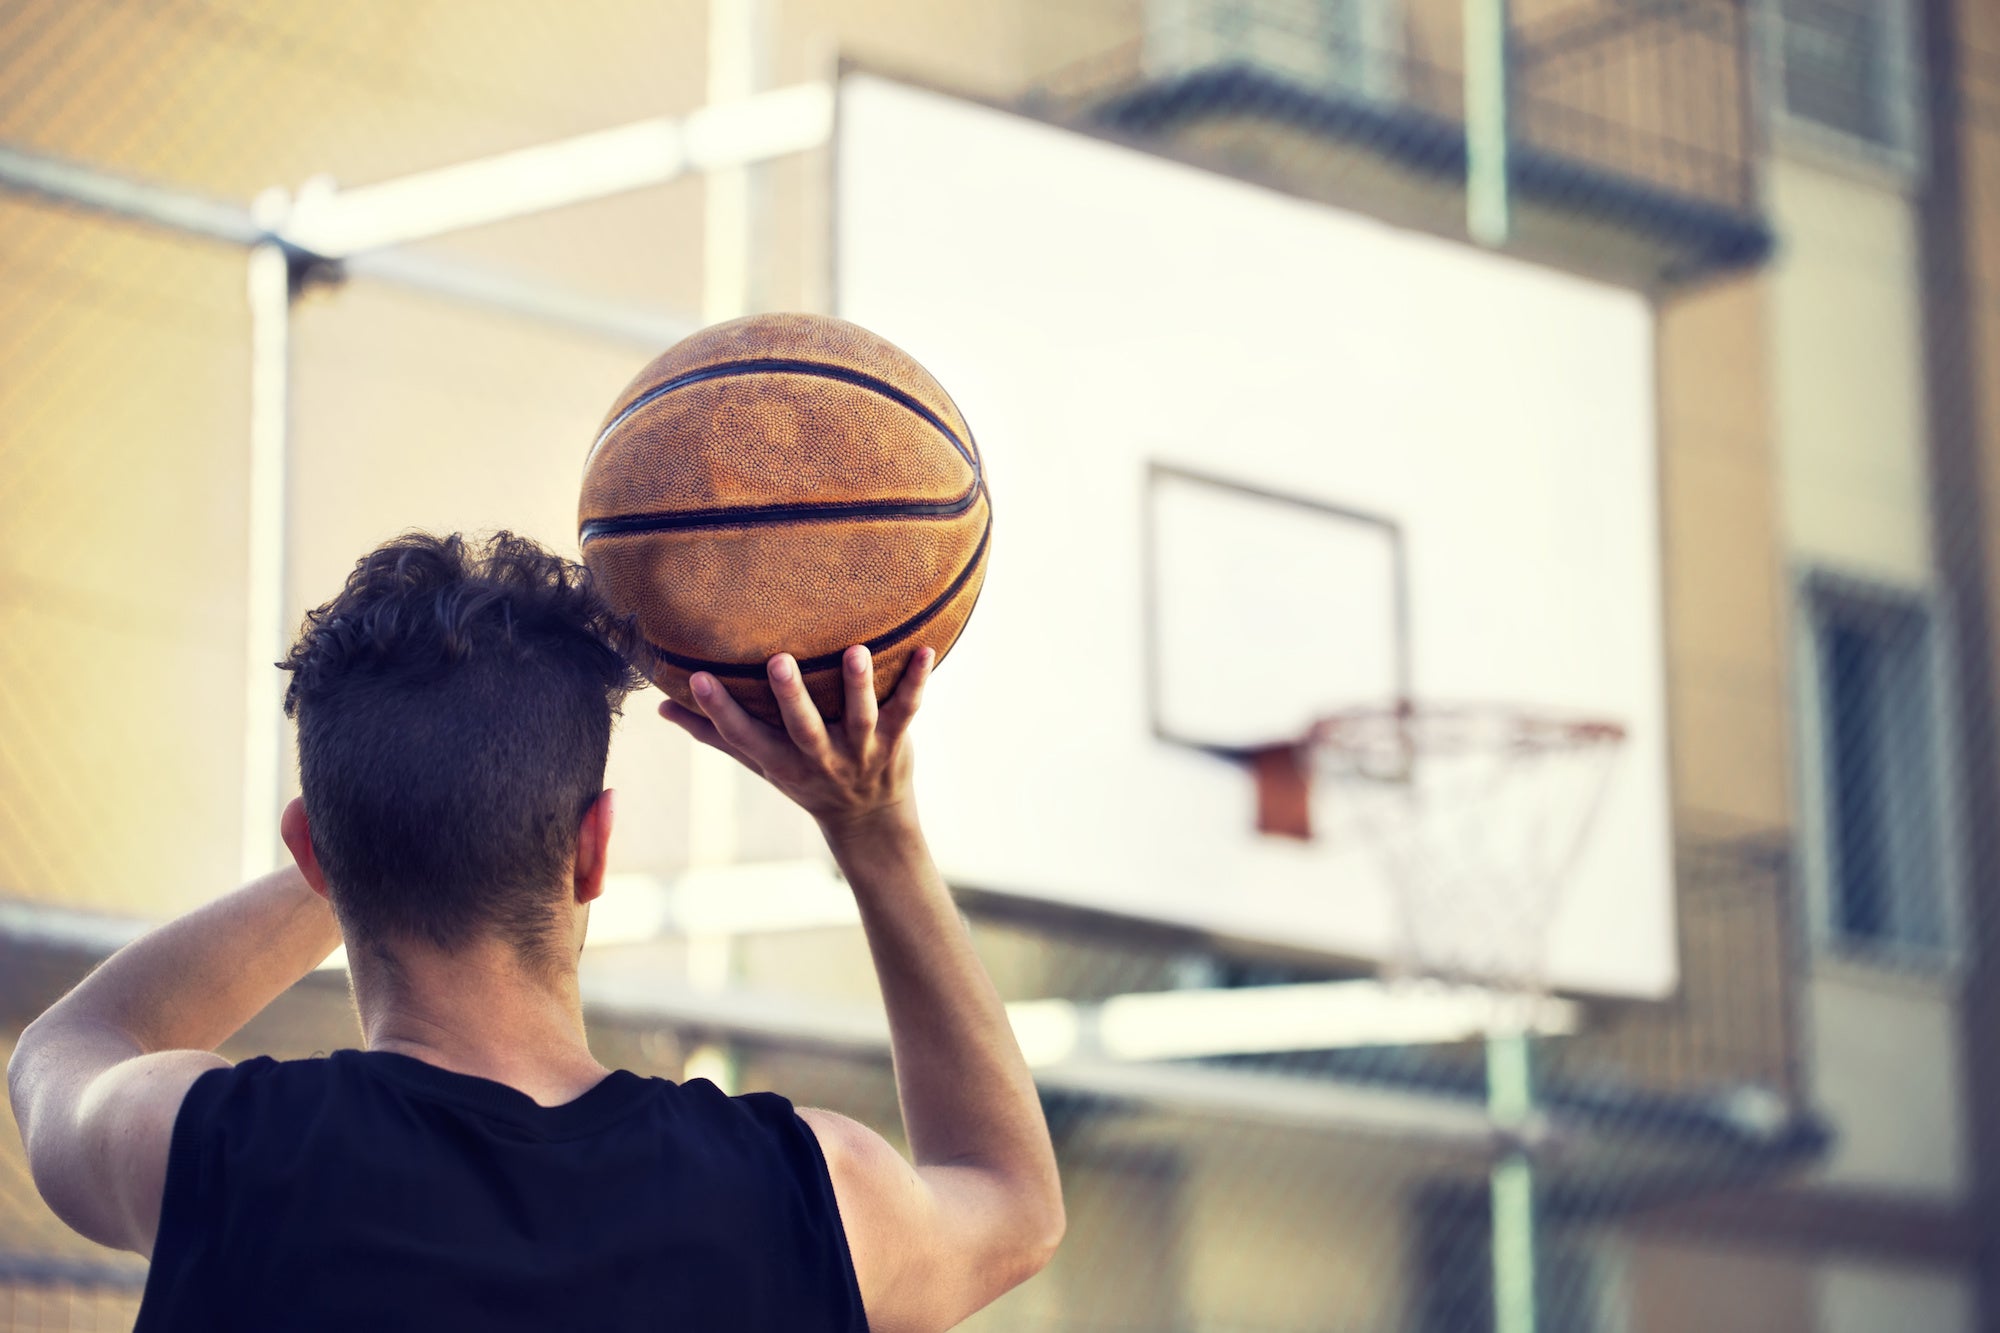 5 Rookie Basketball Mistakes that Cause Back Pain